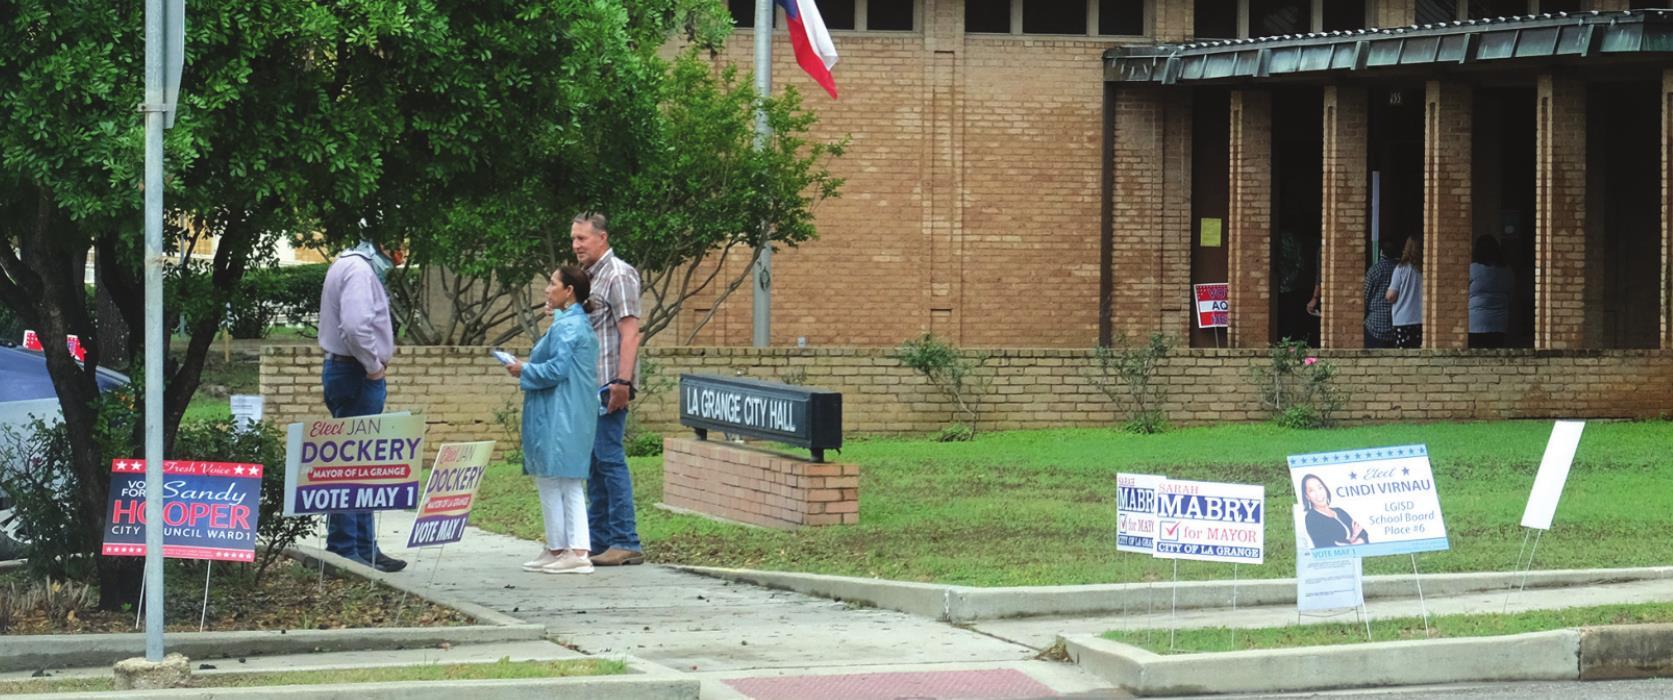 Voters gather at La Grange City Hall on Election Day, Saturday, May 1. Photo by Andy Behlen